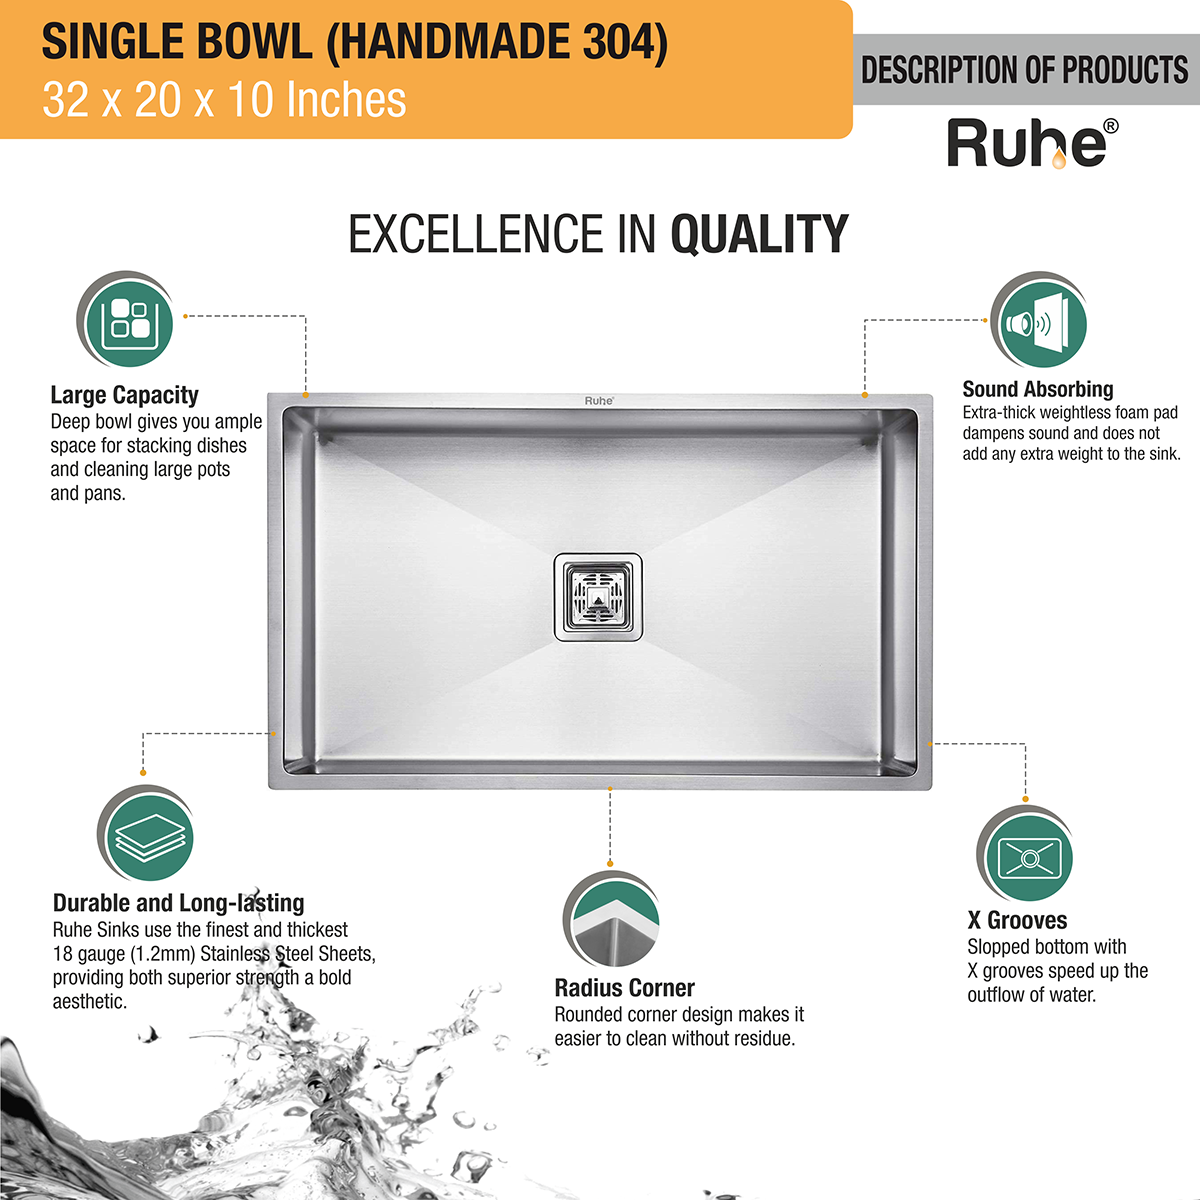 Handmade Single Bowl 304-Grade Kitchen Sink (32 x 20 x 10 Inches) product descriptions